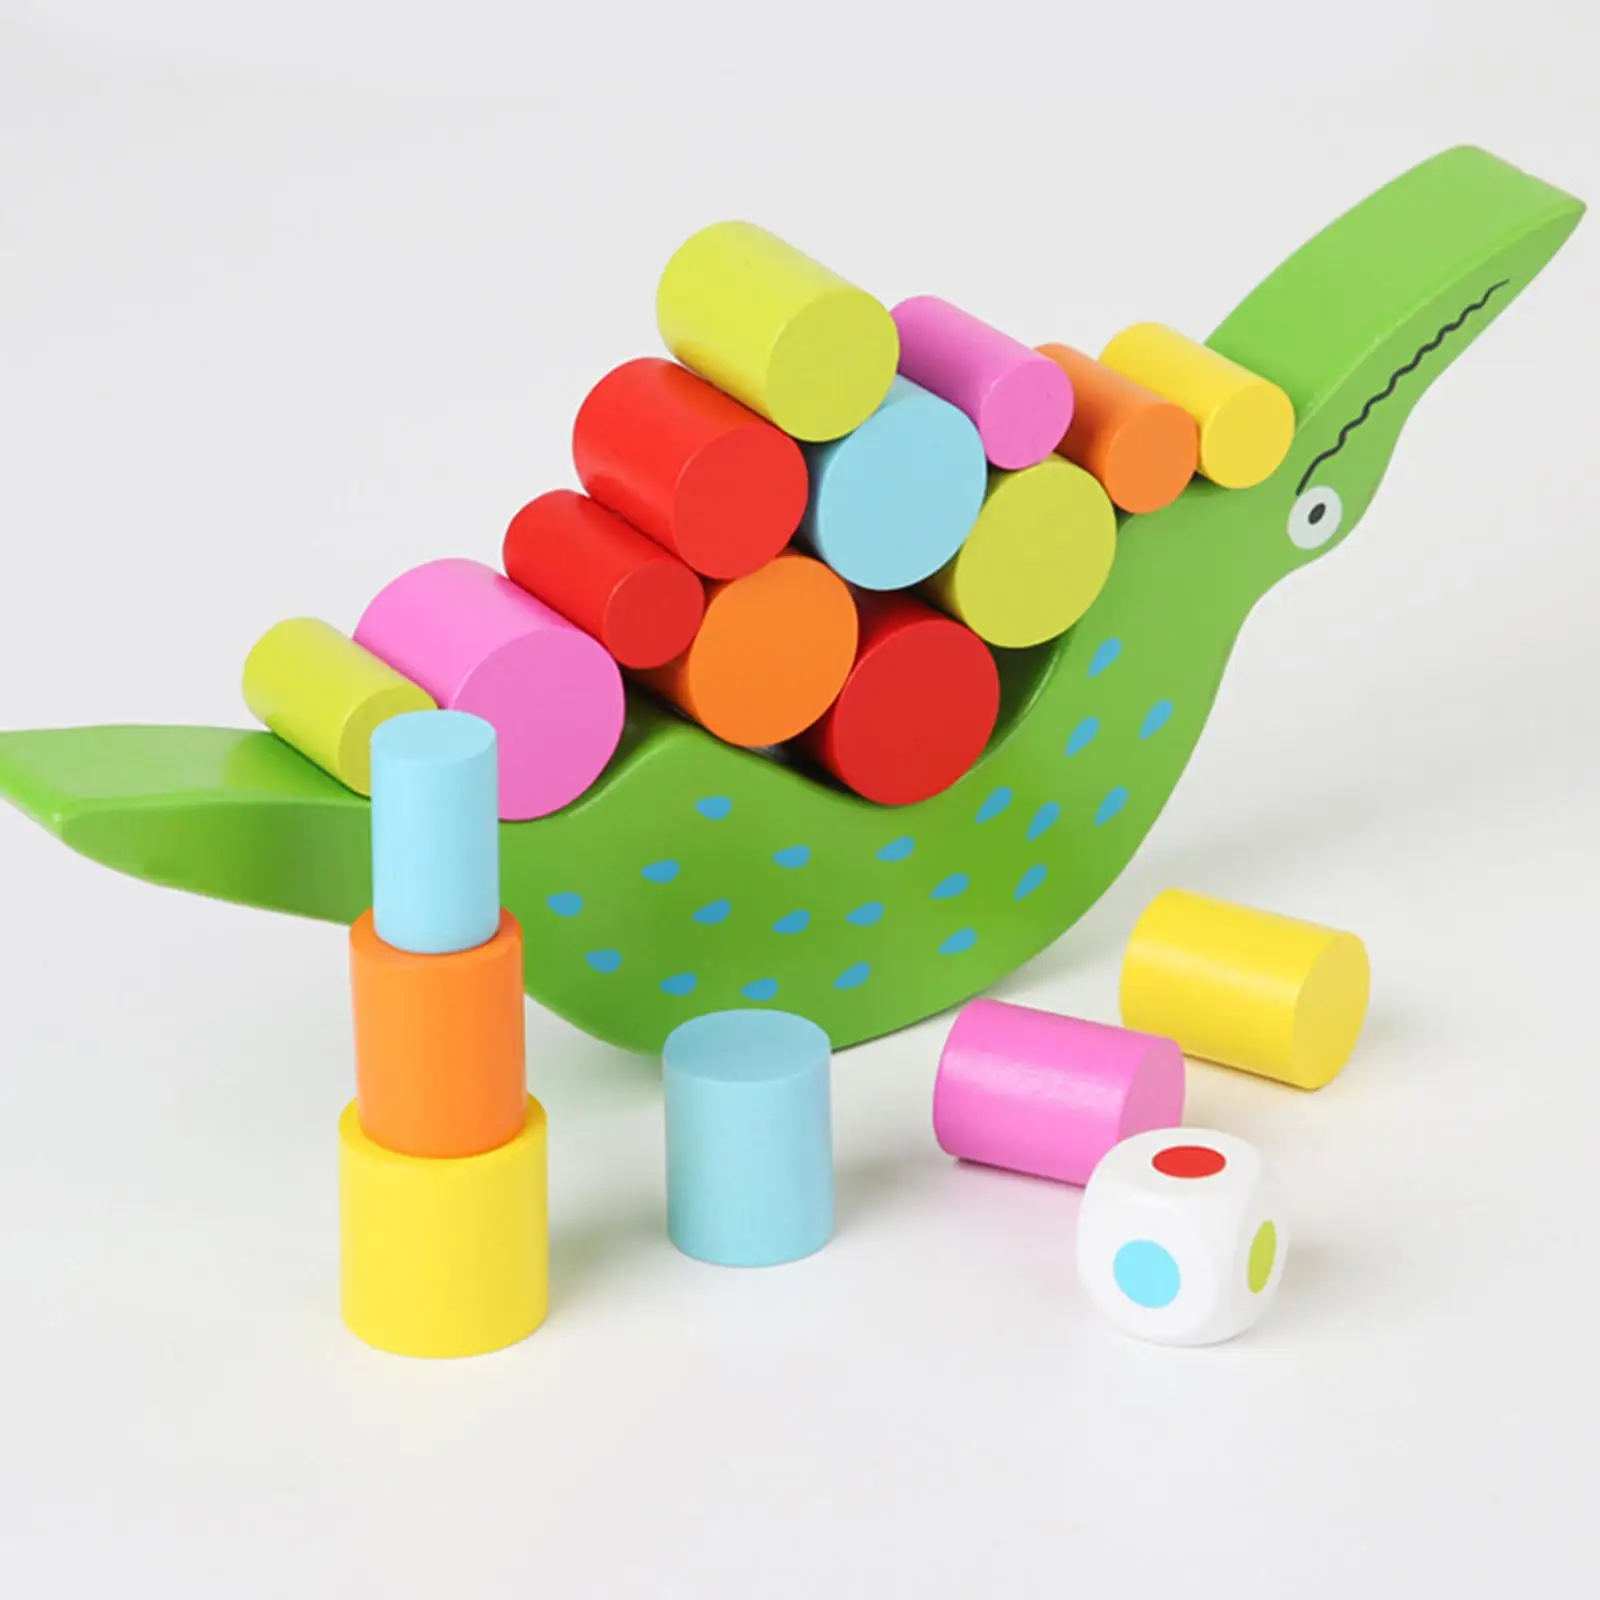 Wooden Stacking Toys Education Puzzle Toys Wooden Blocks for Age 2 3 4 5 6 Children